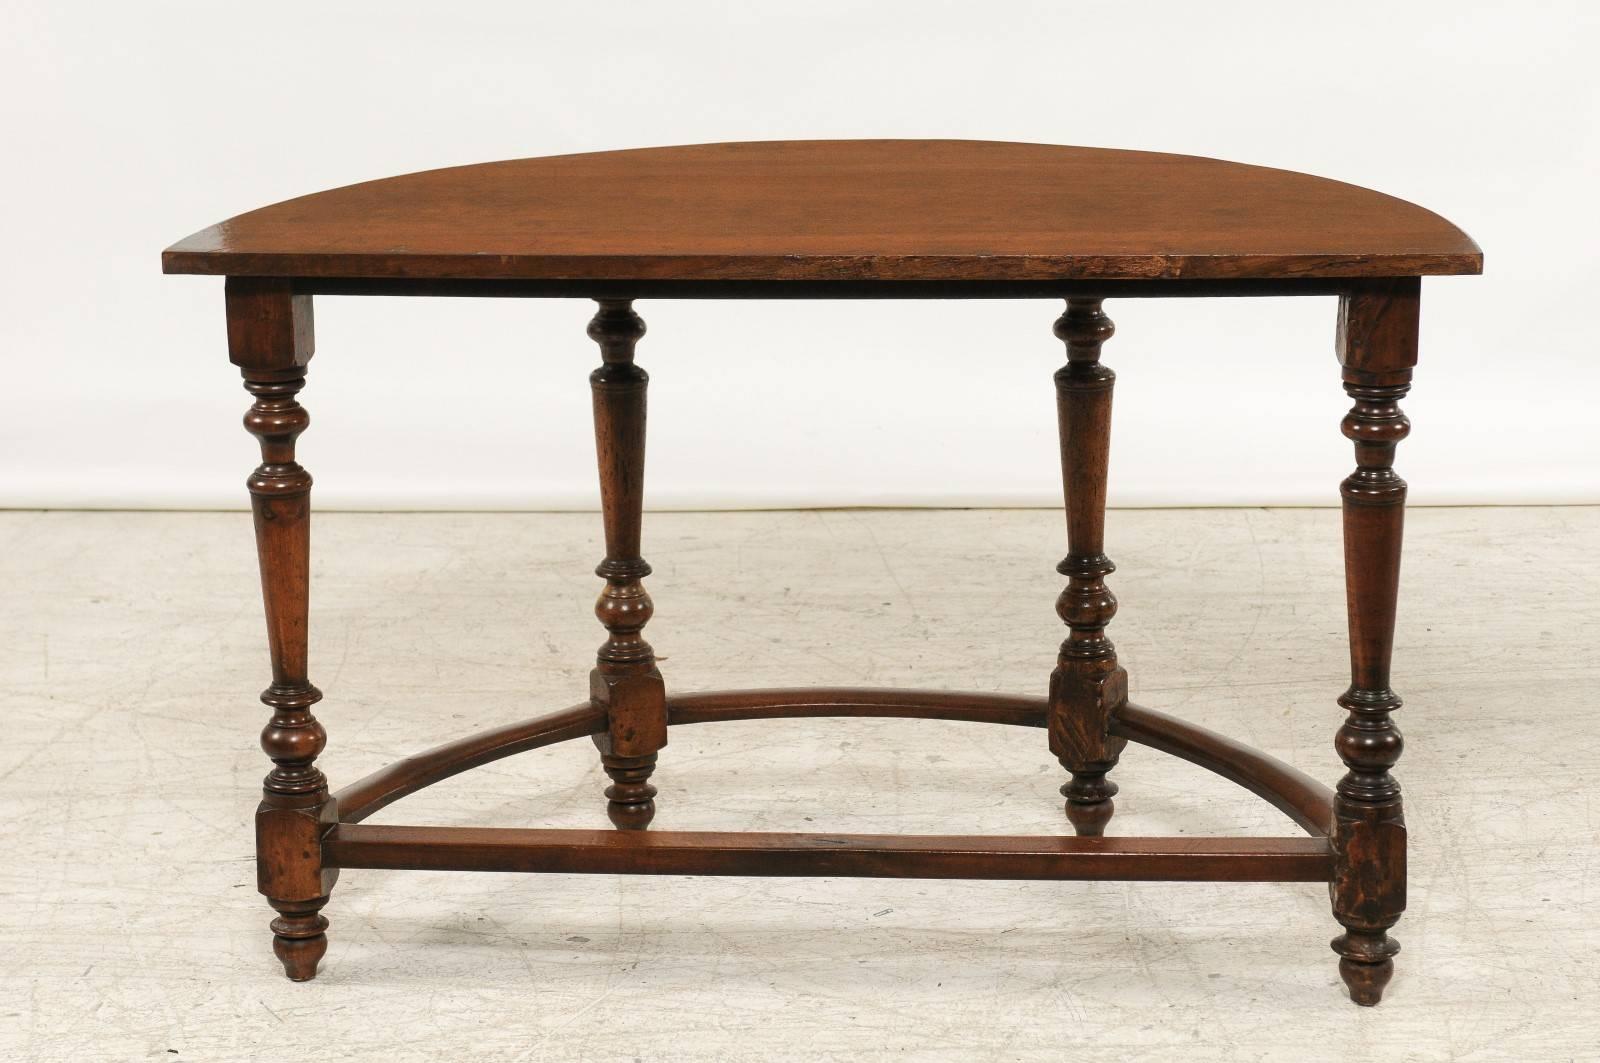 Wood Pair of Large 1820s Italian Walnut Demilune Console Tables with Turned Legs